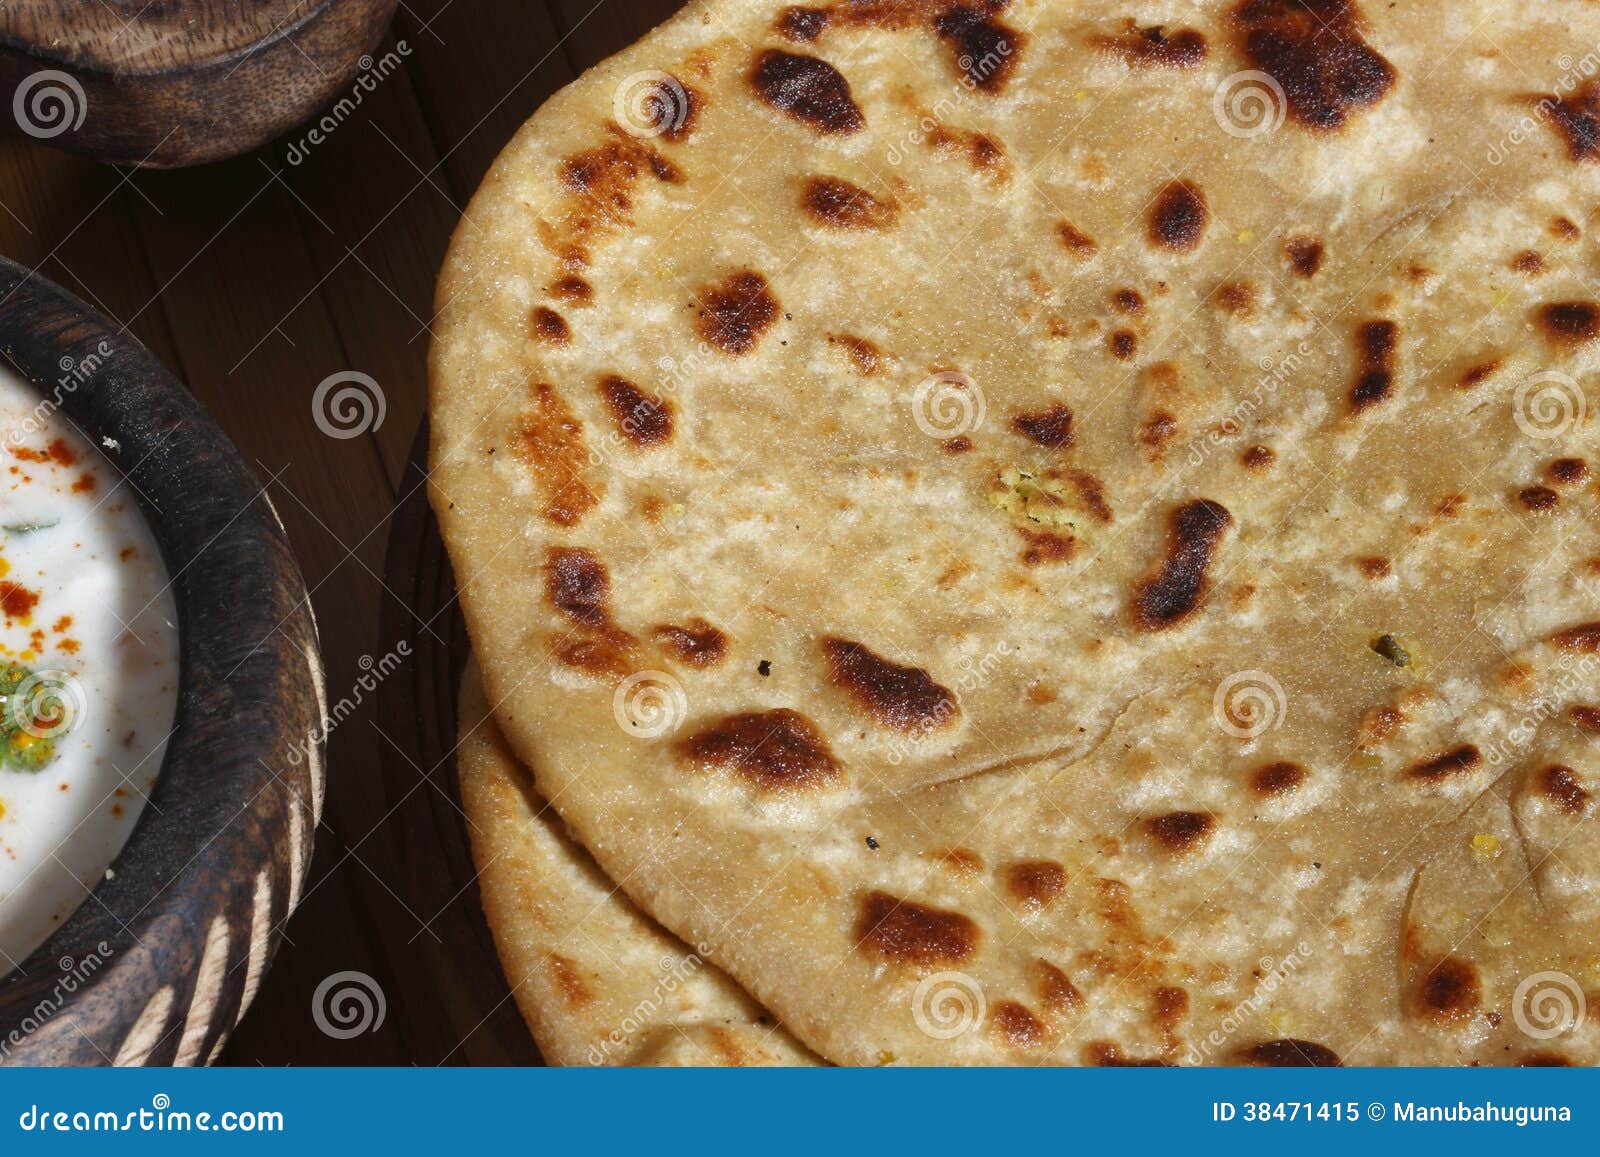 dal jo lolo is a paratha from india